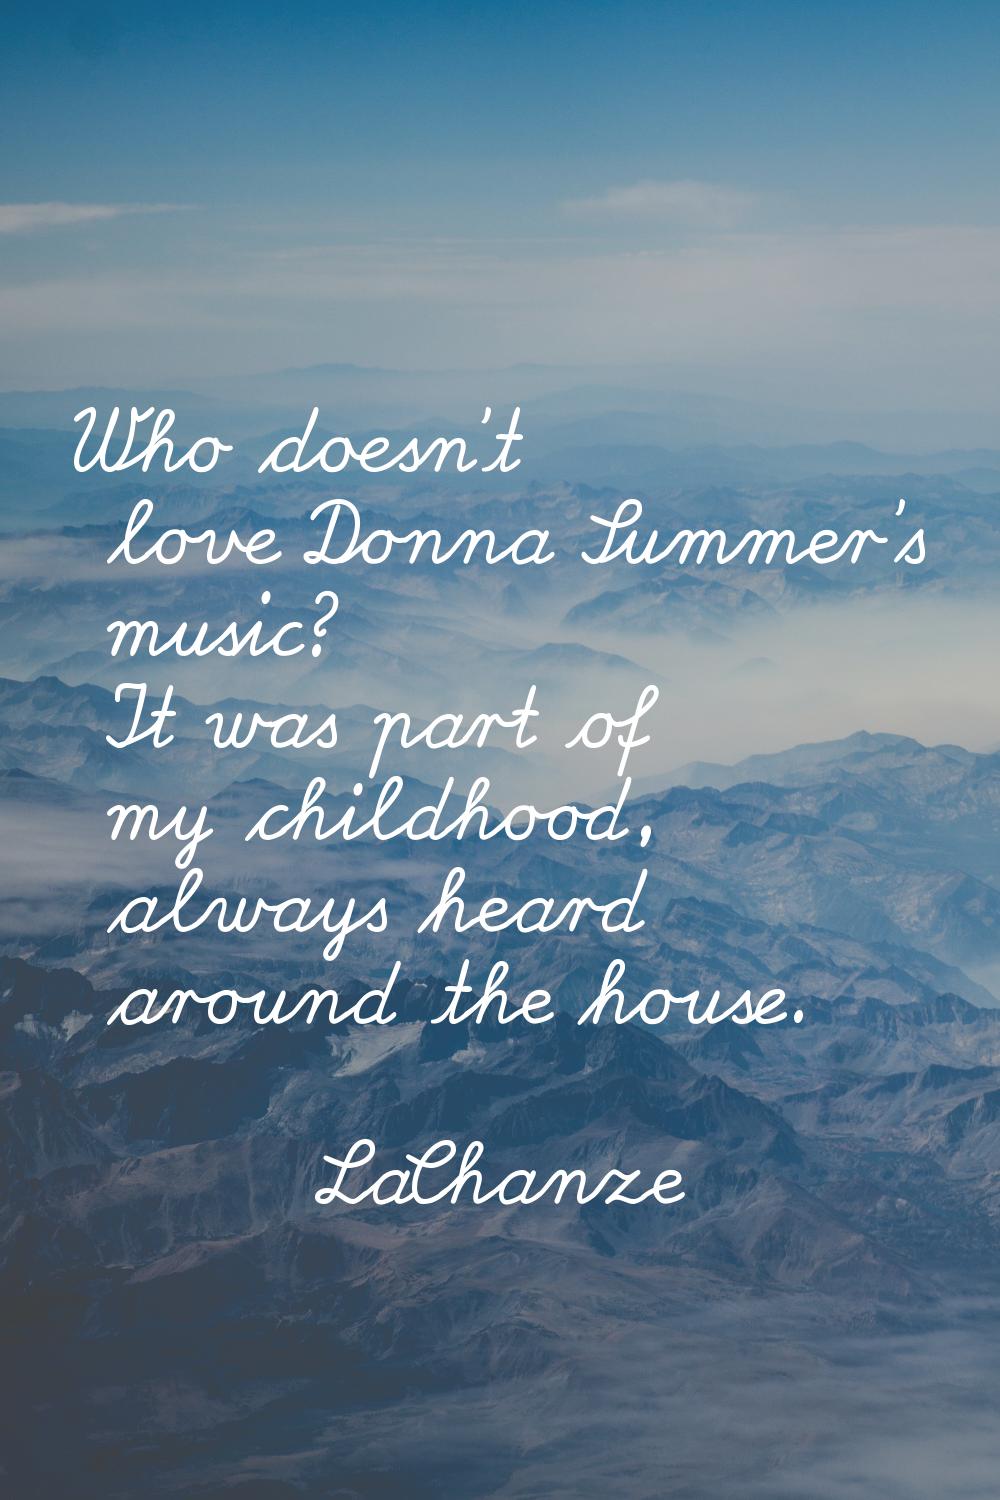 Who doesn't love Donna Summer's music? It was part of my childhood, always heard around the house.